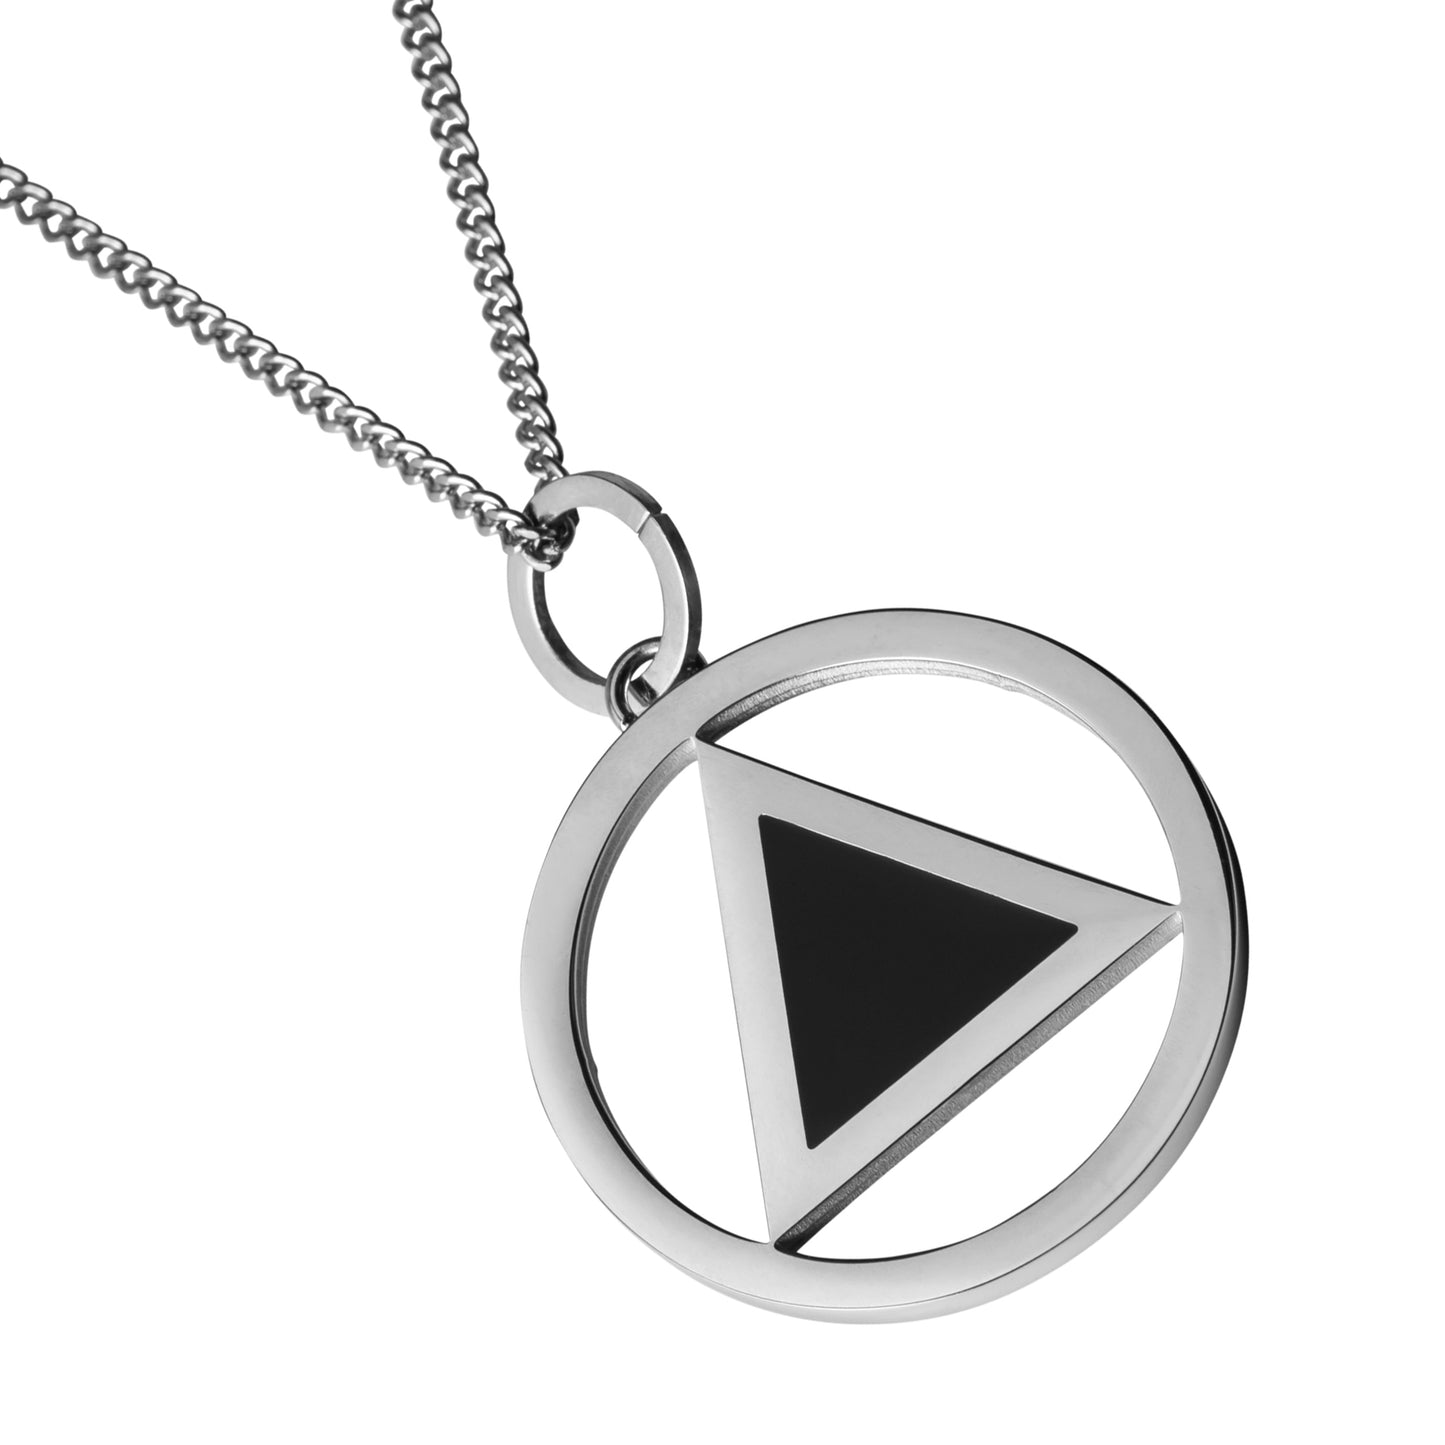 Recovery Triangle Circle Pendant Necklace - Sobriety Support Jewelry Gift